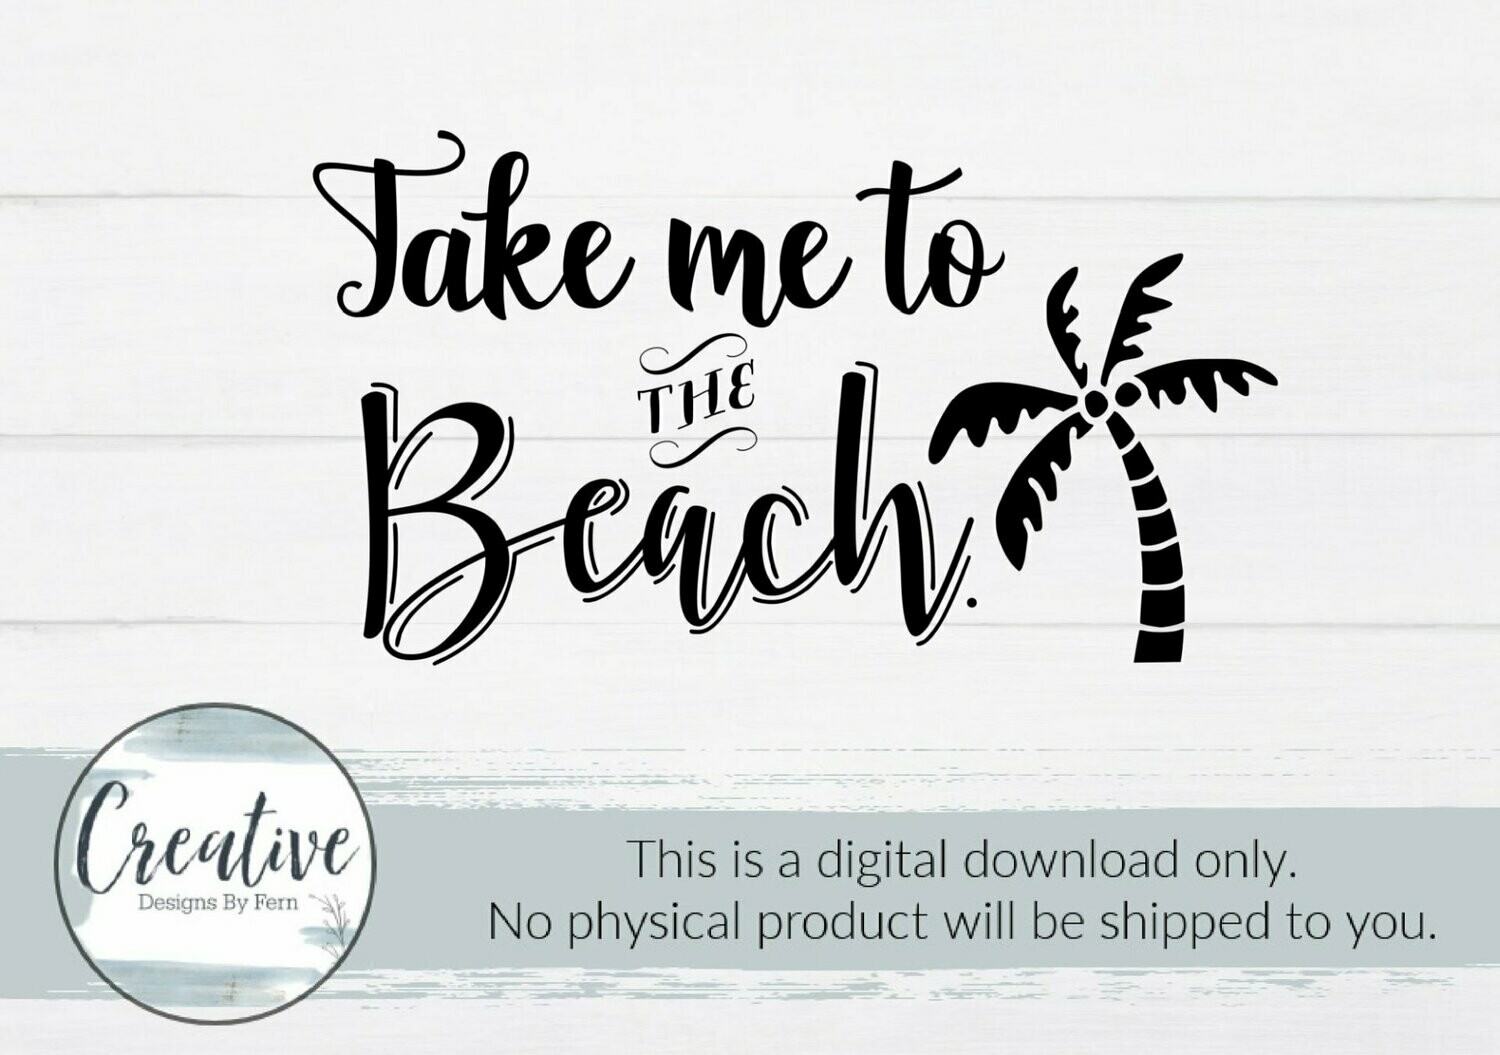 Take Me To the Beach (Digital Download)